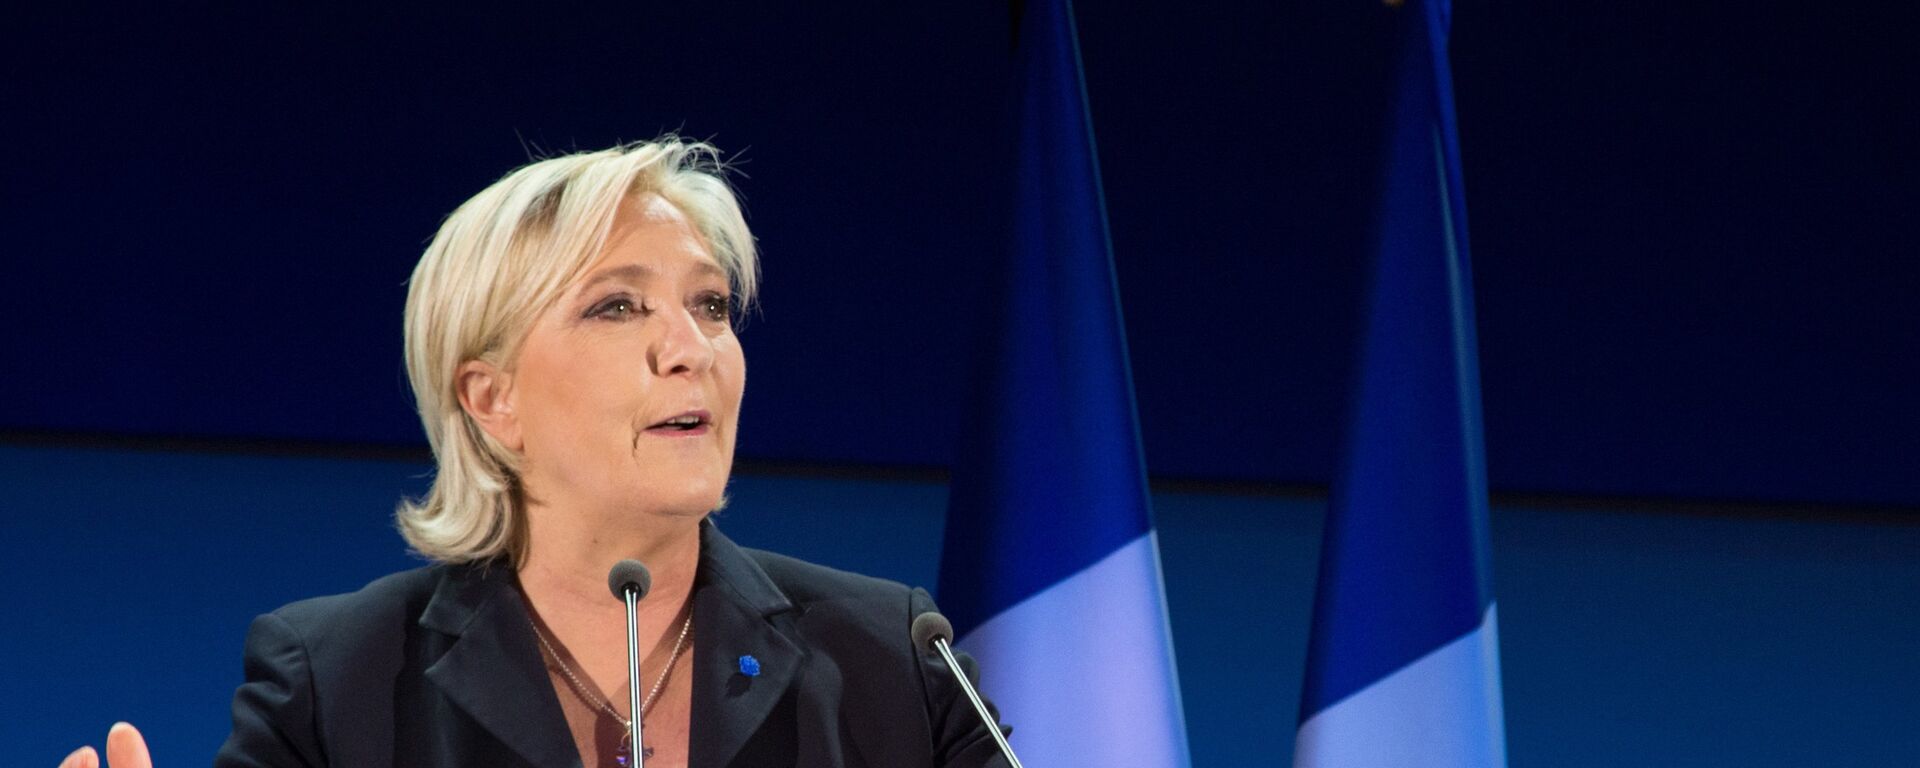 Marine Le Pen, French presidential candidate and leader of the political party the National Front, during a news conference following the first round of the presidential election. - Sputnik Moldova-România, 1920, 12.04.2022